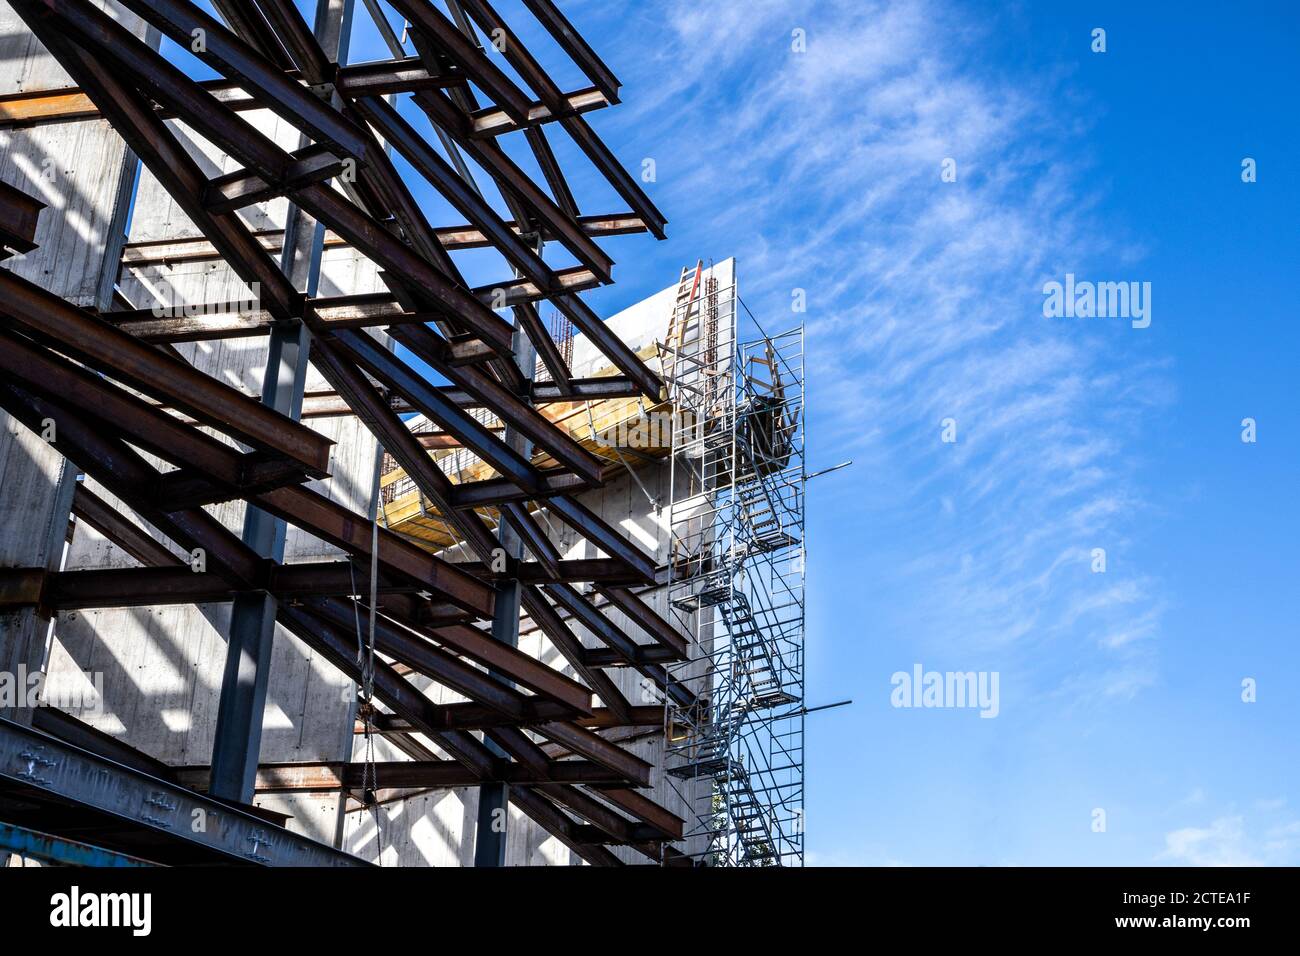 Partial construction of an industrial multilevel building. Steel framing /metal beams visible with walkways and ladders. Corner view. Stock Photo